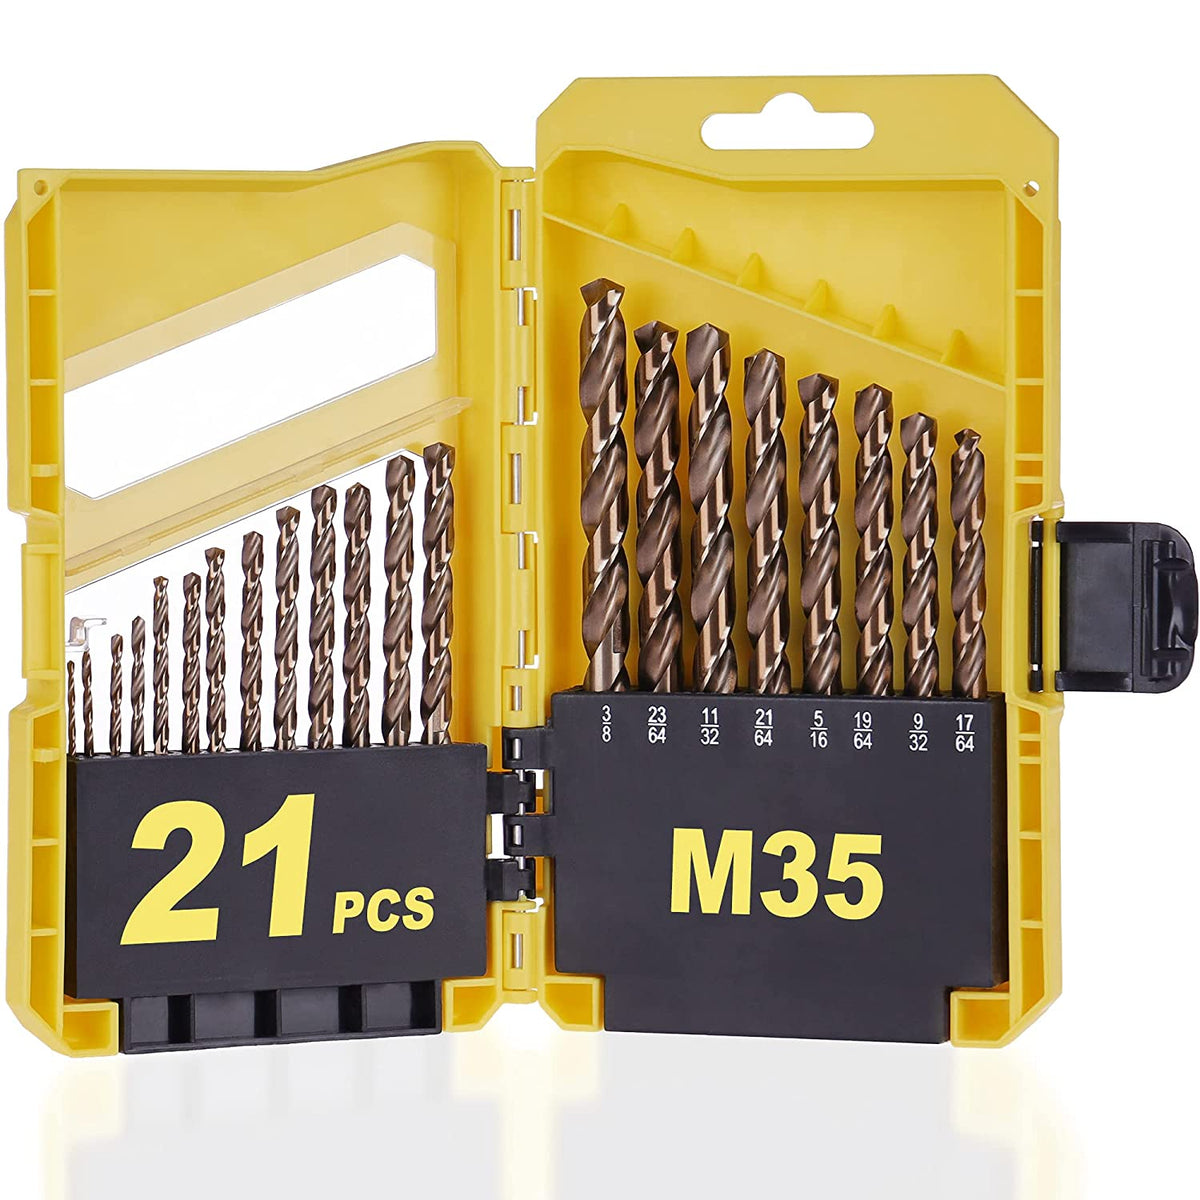 Upgrade Your Drilling Experience with this 21pcs Alloy Steel Bits